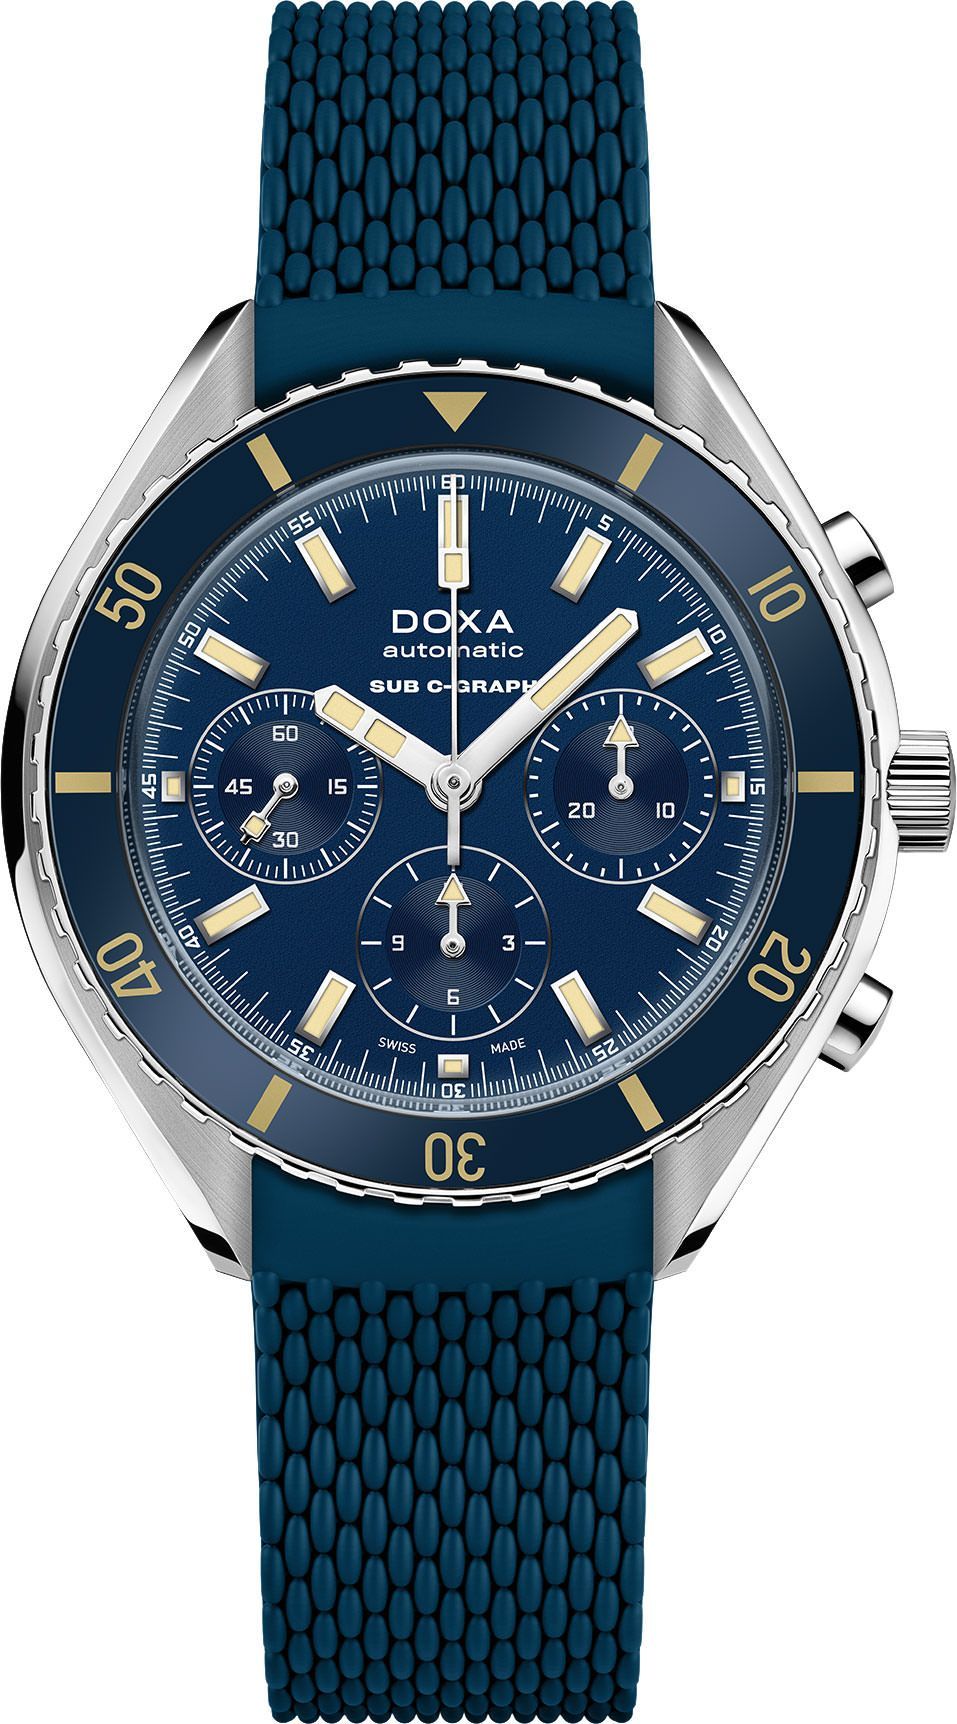 Doxa SUB 200 C-GRAPH Caribbean Blue Dial 45 mm Automatic Watch For Men - 1